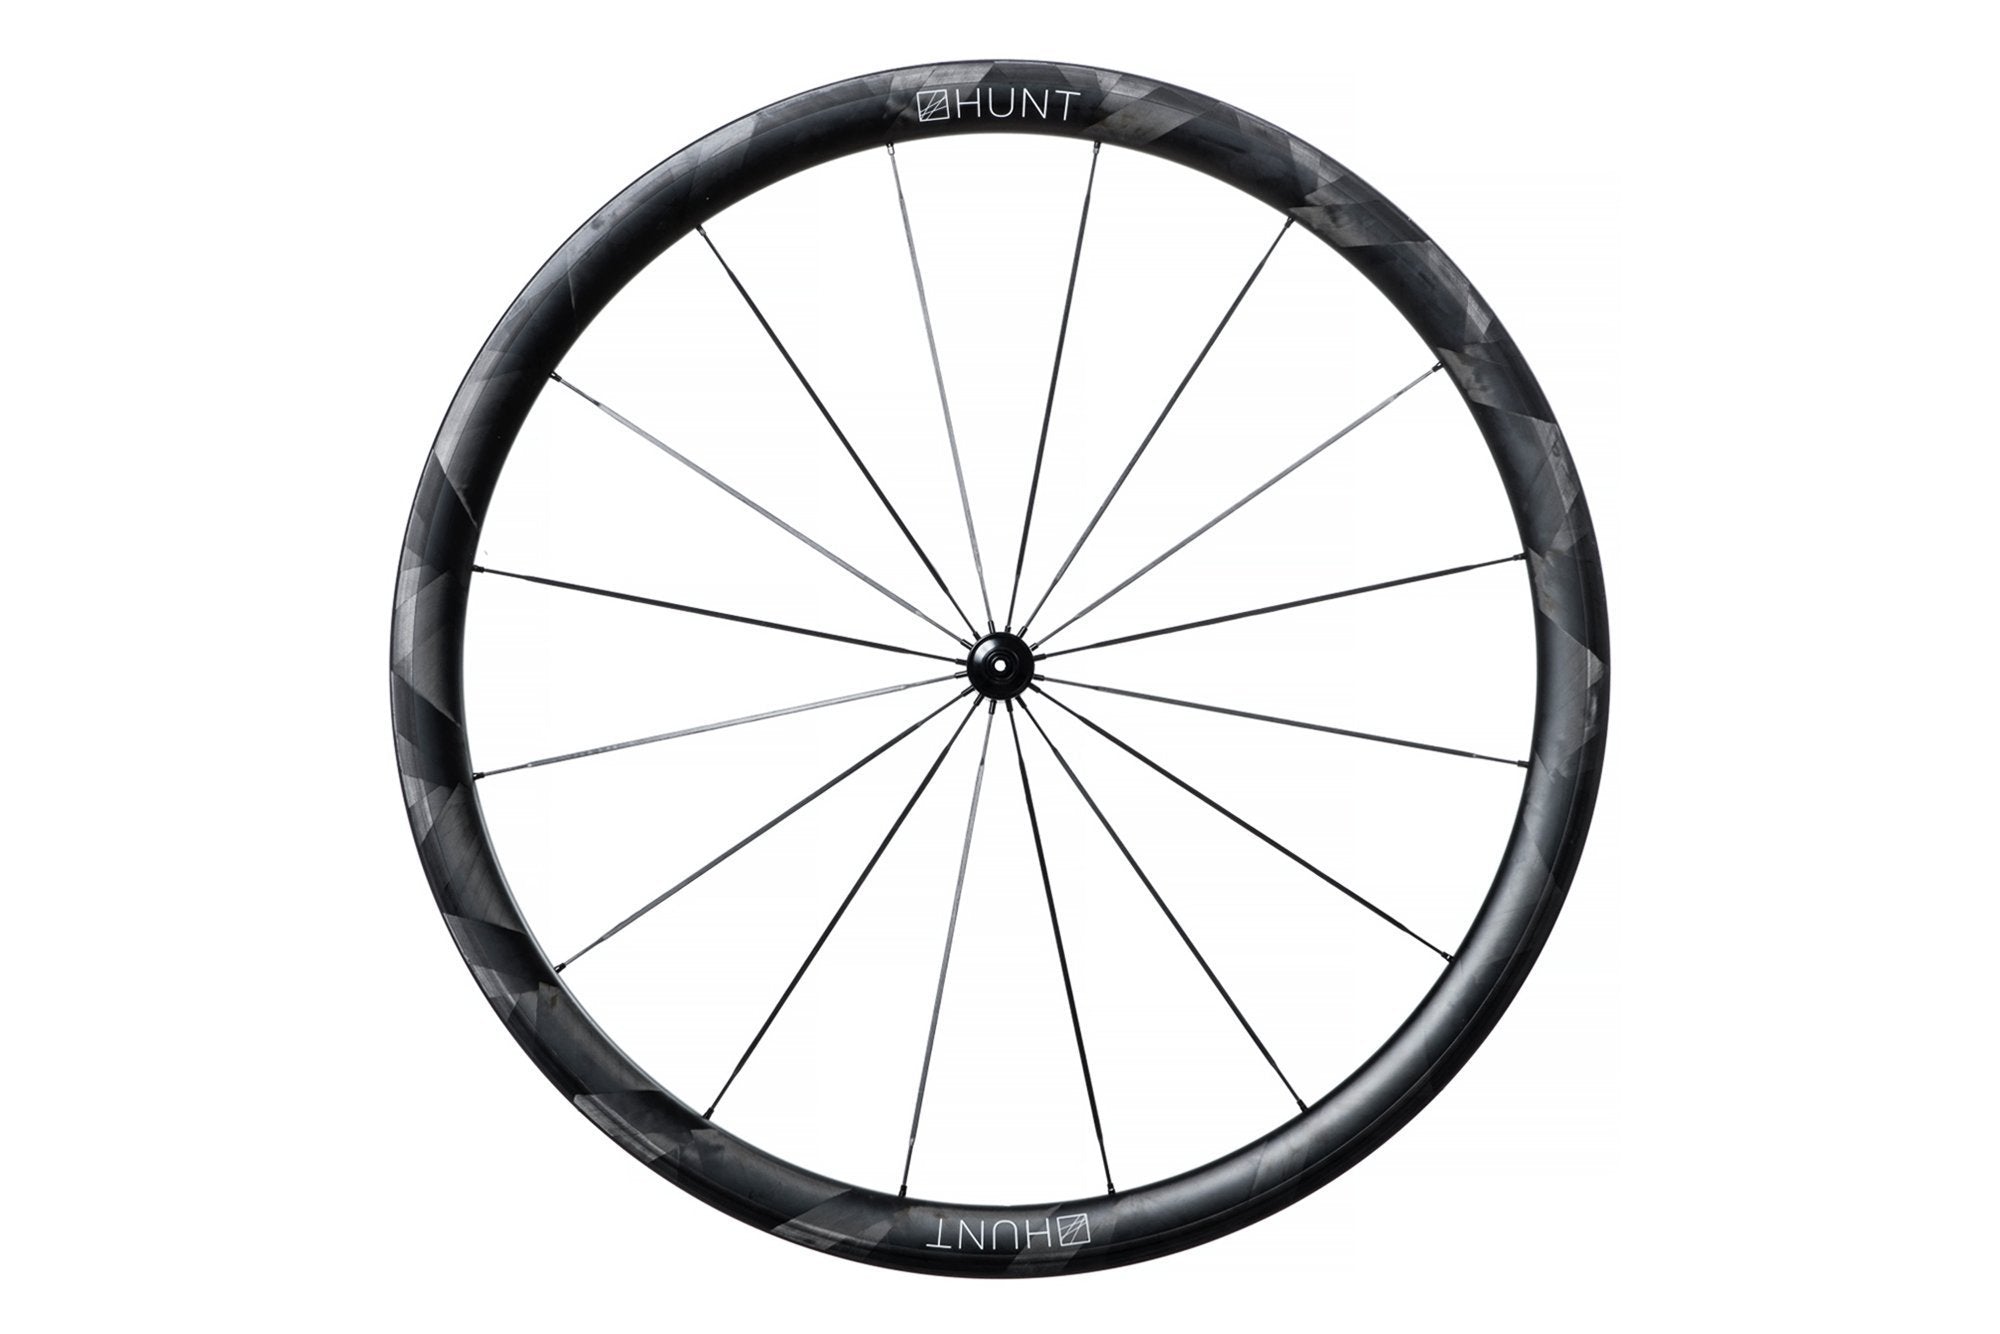 <h1>Rims</h1><i>Using an adaptive filament winding process, which varies thickness and orientation across the rim, these rims achieve a very light weight and excellent transmission of force from the spoke to the rest of the rim. The process also provides additional material to create high strength at the spoke areas while minimising unnecessary weight between the spokes. They are wide at 26mm (19mm int.) which creates a great tyre profile, resulting in excellent grip and lower rolling resistance.</i>